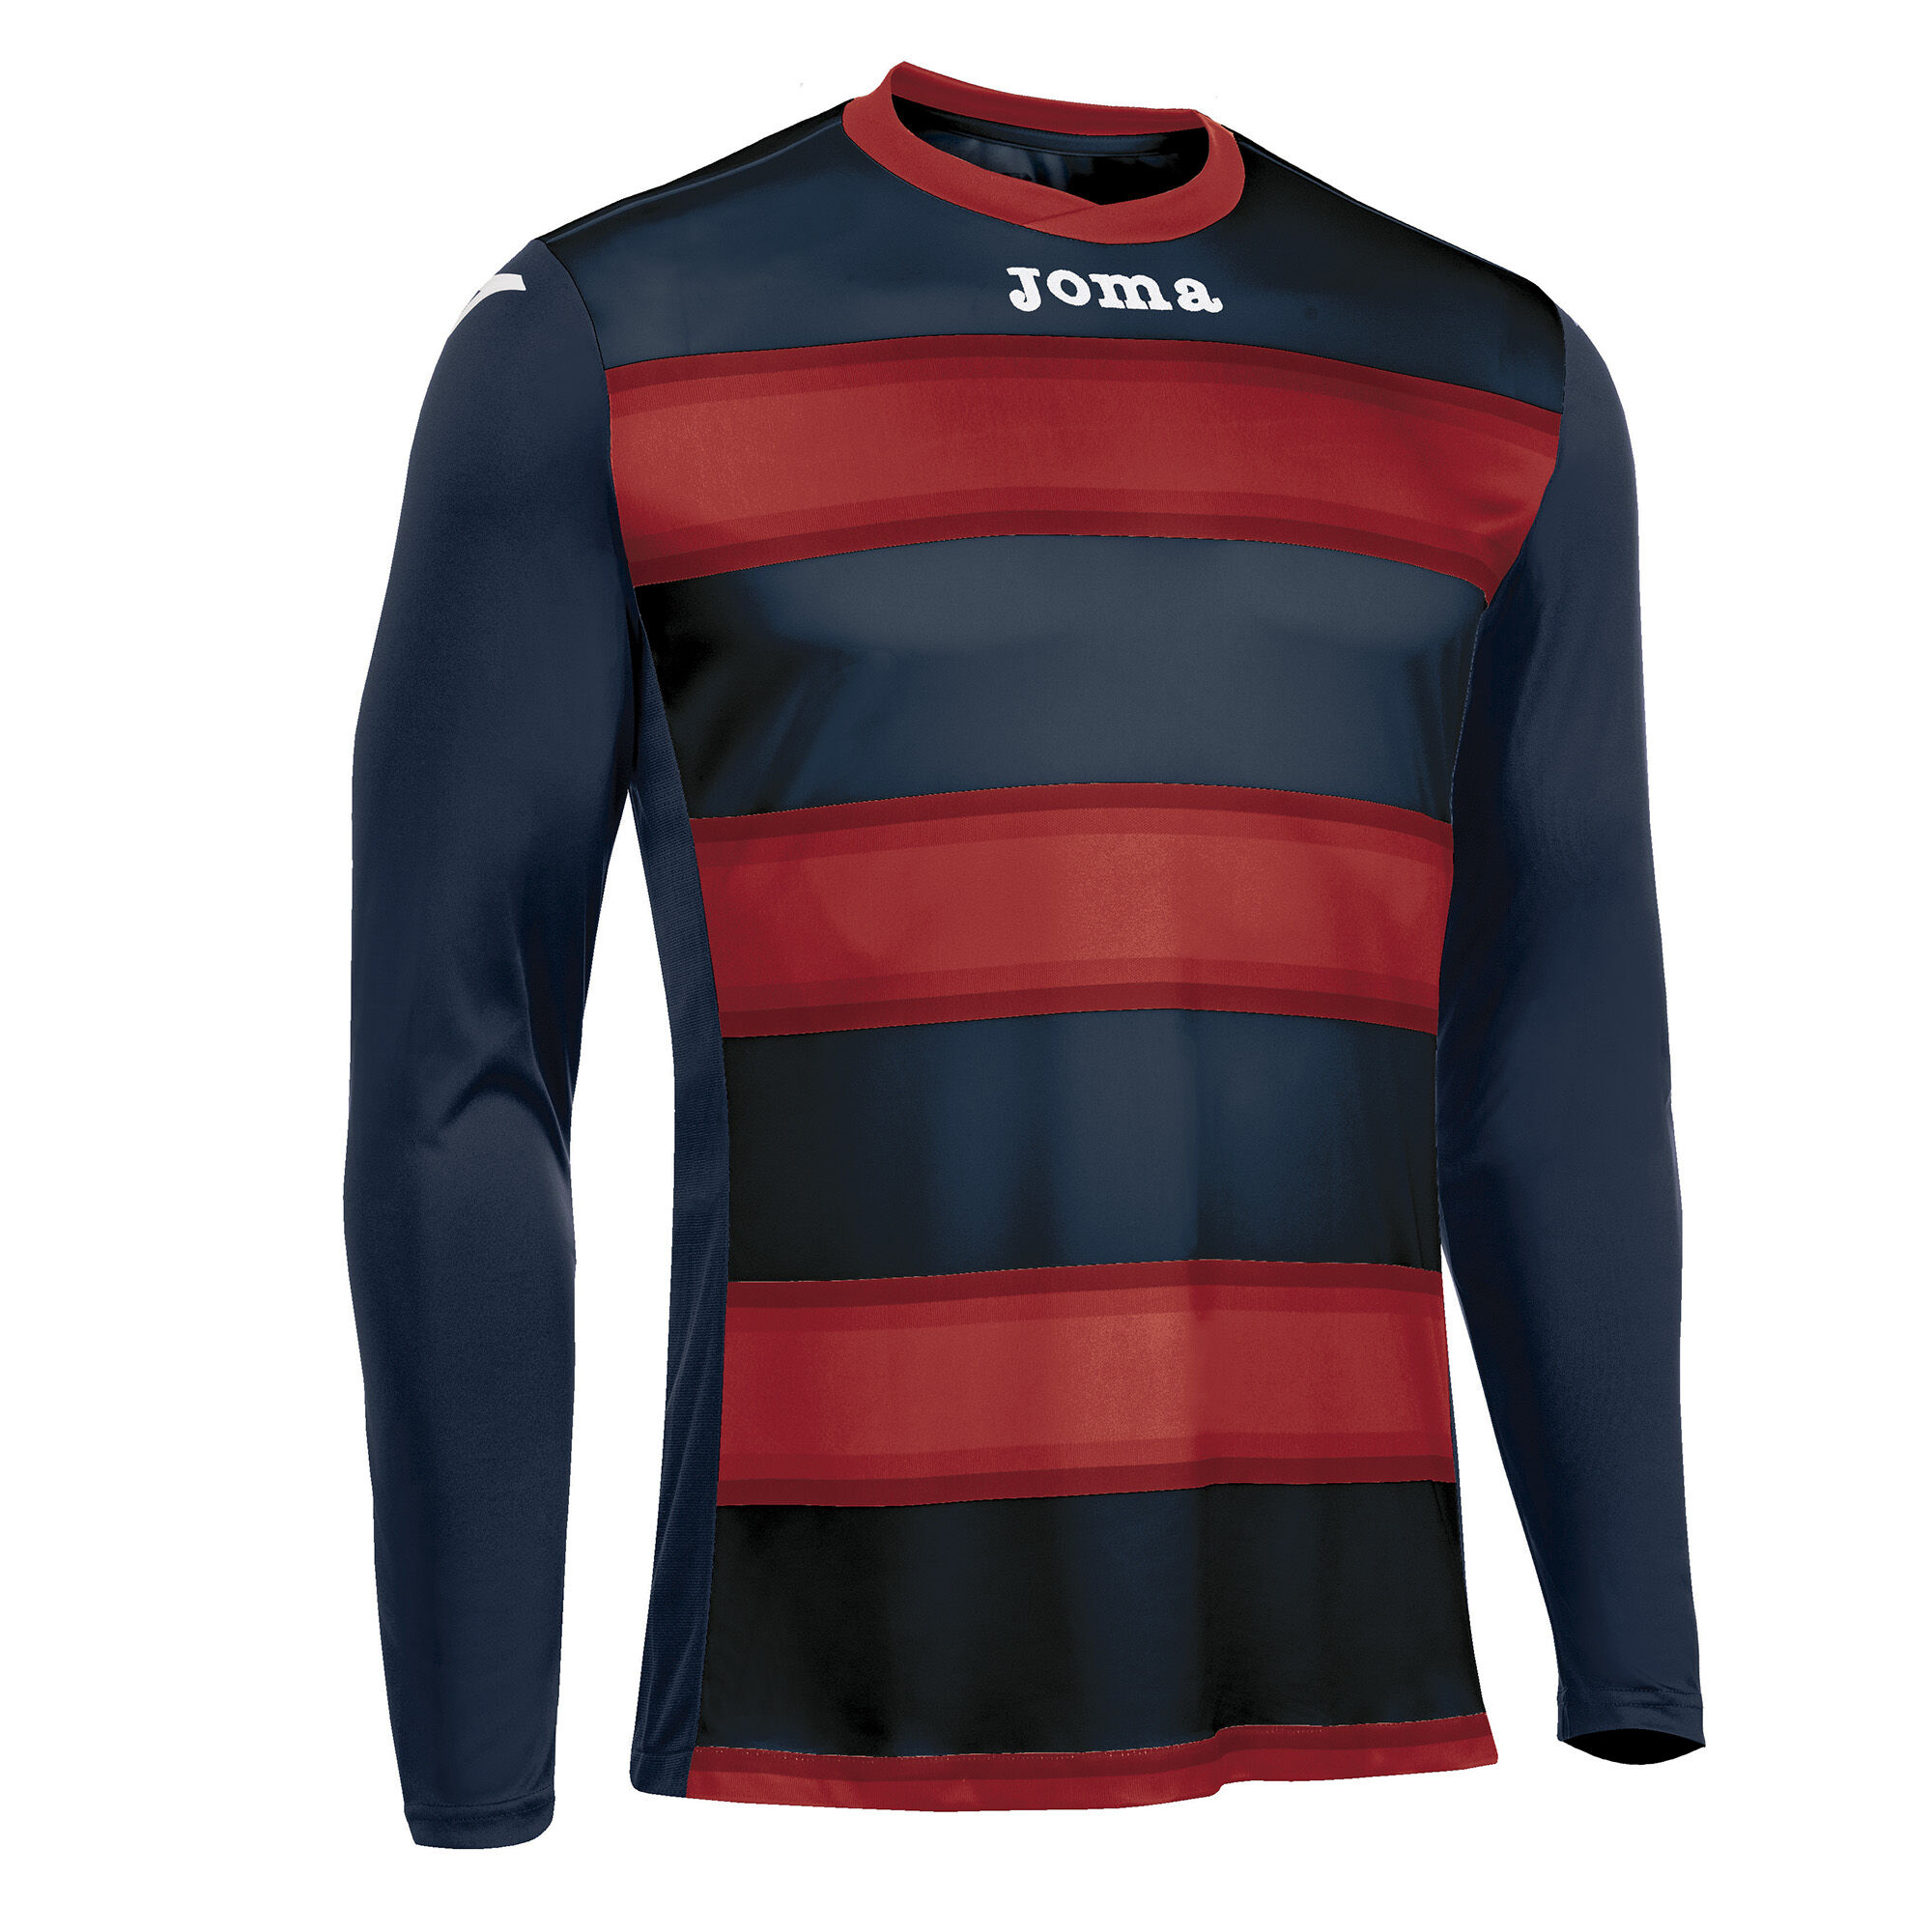 MAILLOT MANCHES LONGUES HOMME EUROPA III BLEU MARINE ROUGE